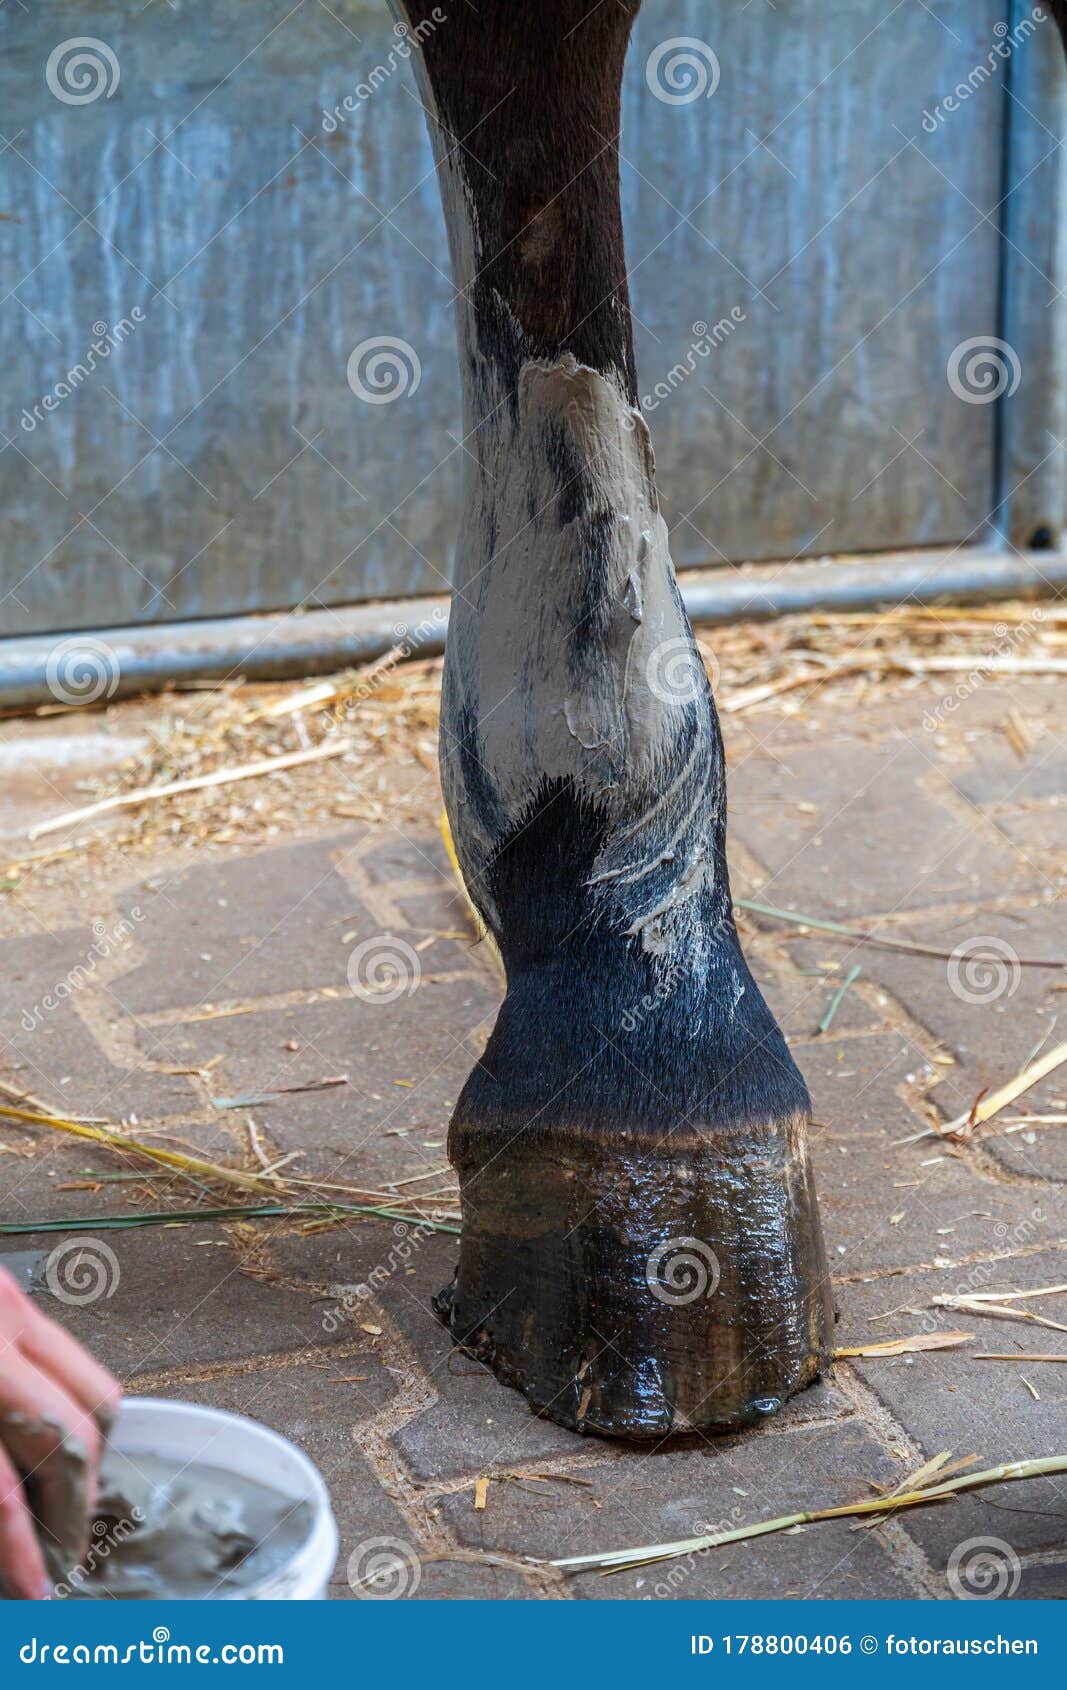 closeup of a horse`s hind leg with gray alumina clay paste applied as medical treatment against tendinitis tendon inflammation